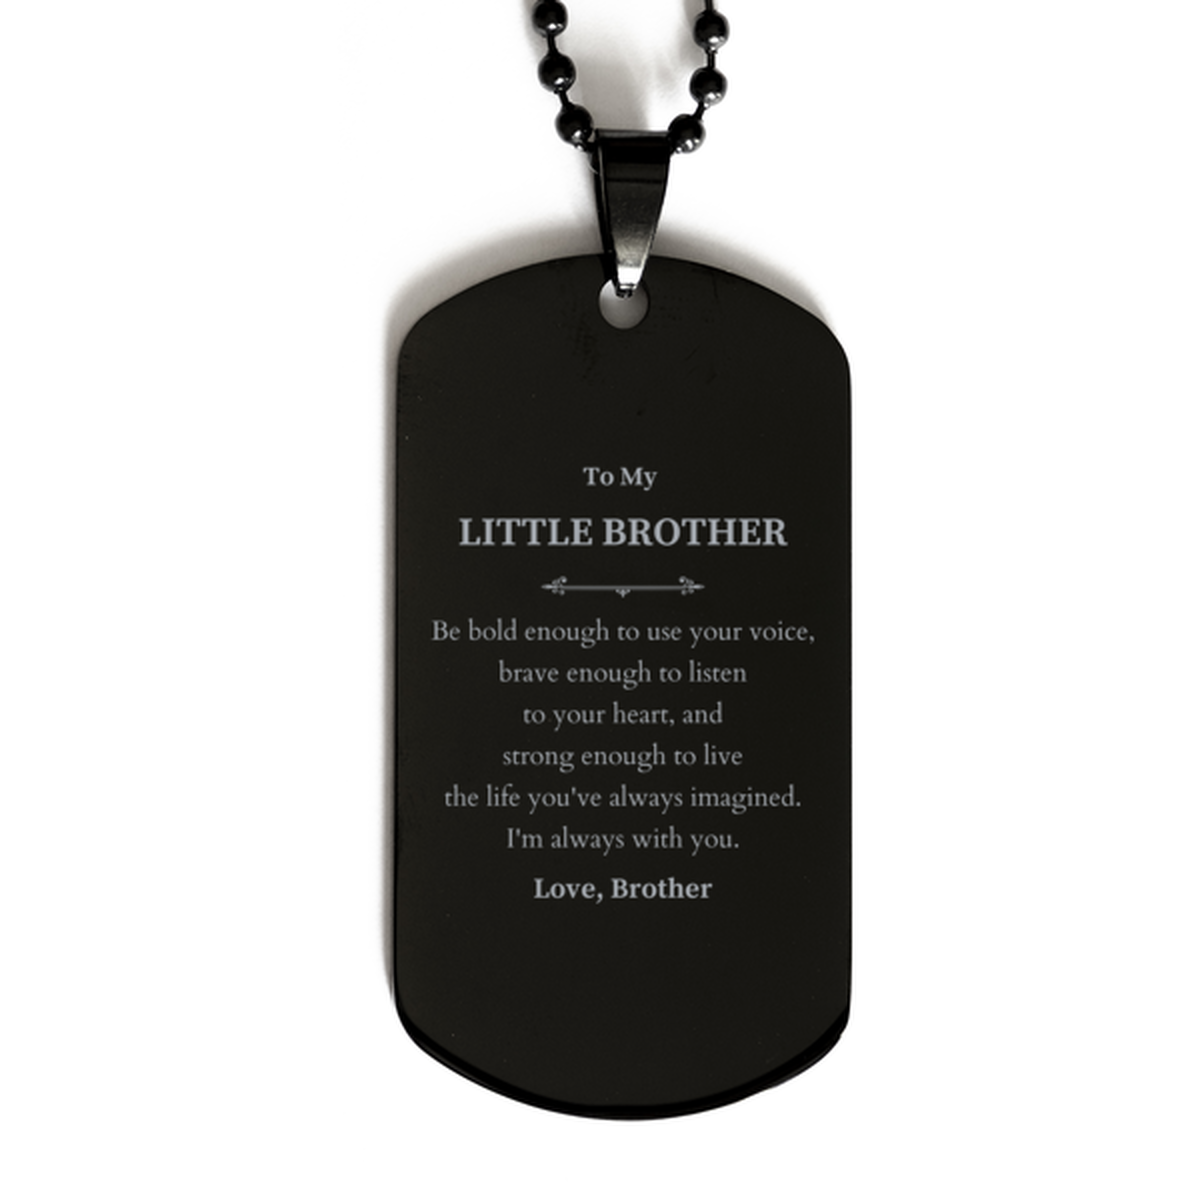 Keepsake Little Brother Black Dog Tag Gift Idea Graduation Christmas Birthday Little Brother from Brother, Little Brother Be bold enough to use your voice, brave enough to listen to your heart. Love, Brother